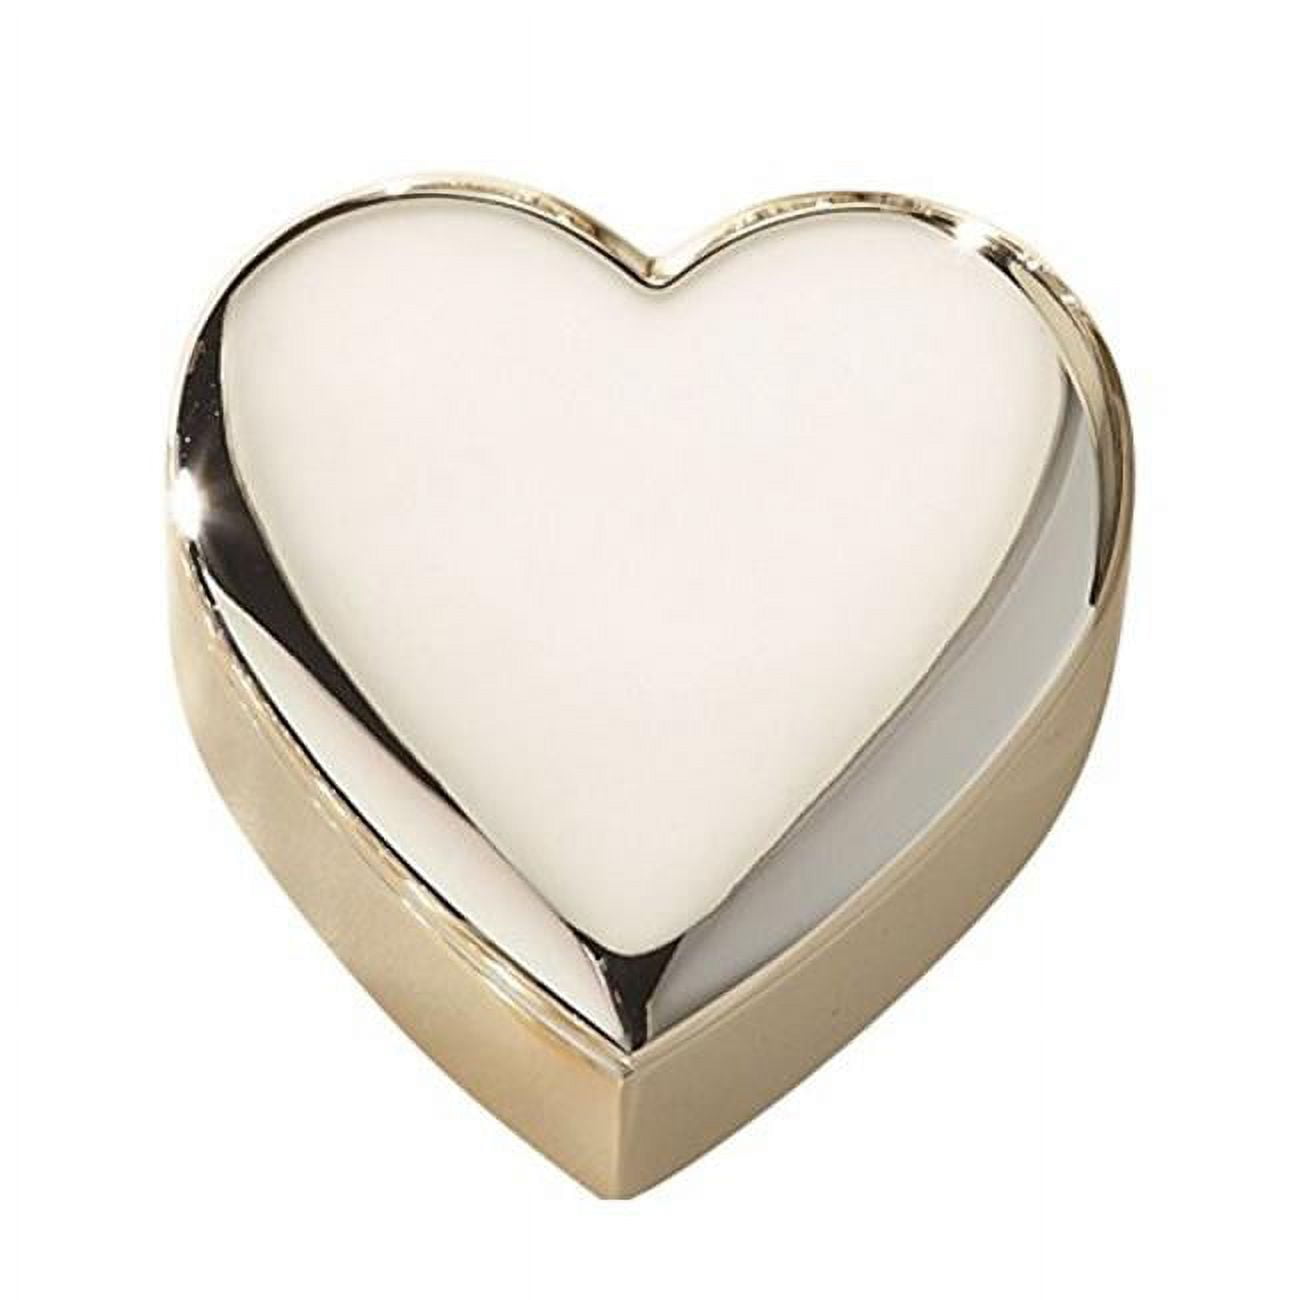 026032 2.5 X 2.5 In. Heart Box - Nickel Plated